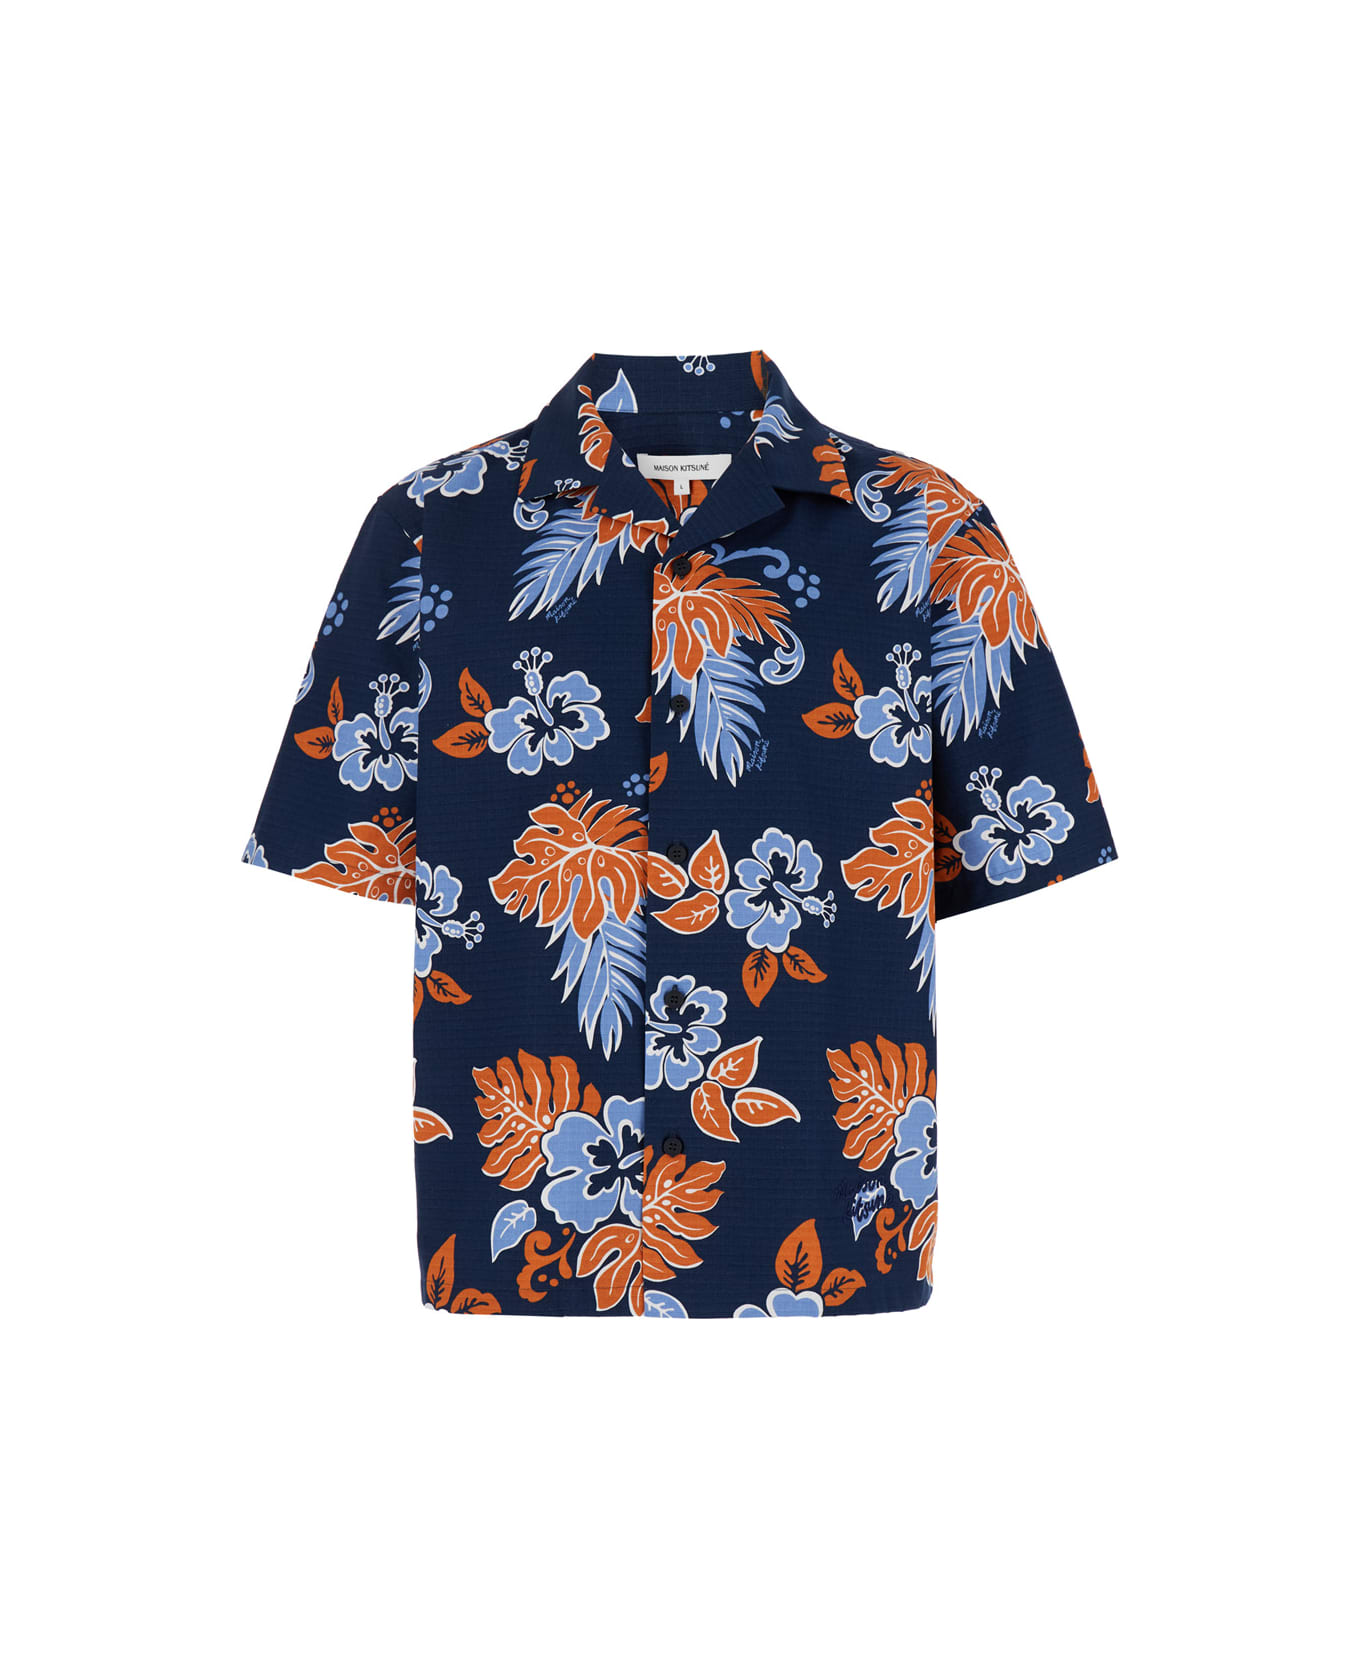 Maison Kitsuné Blue Shirt With Short Sleeves In Cotton Man - Blu シャツ